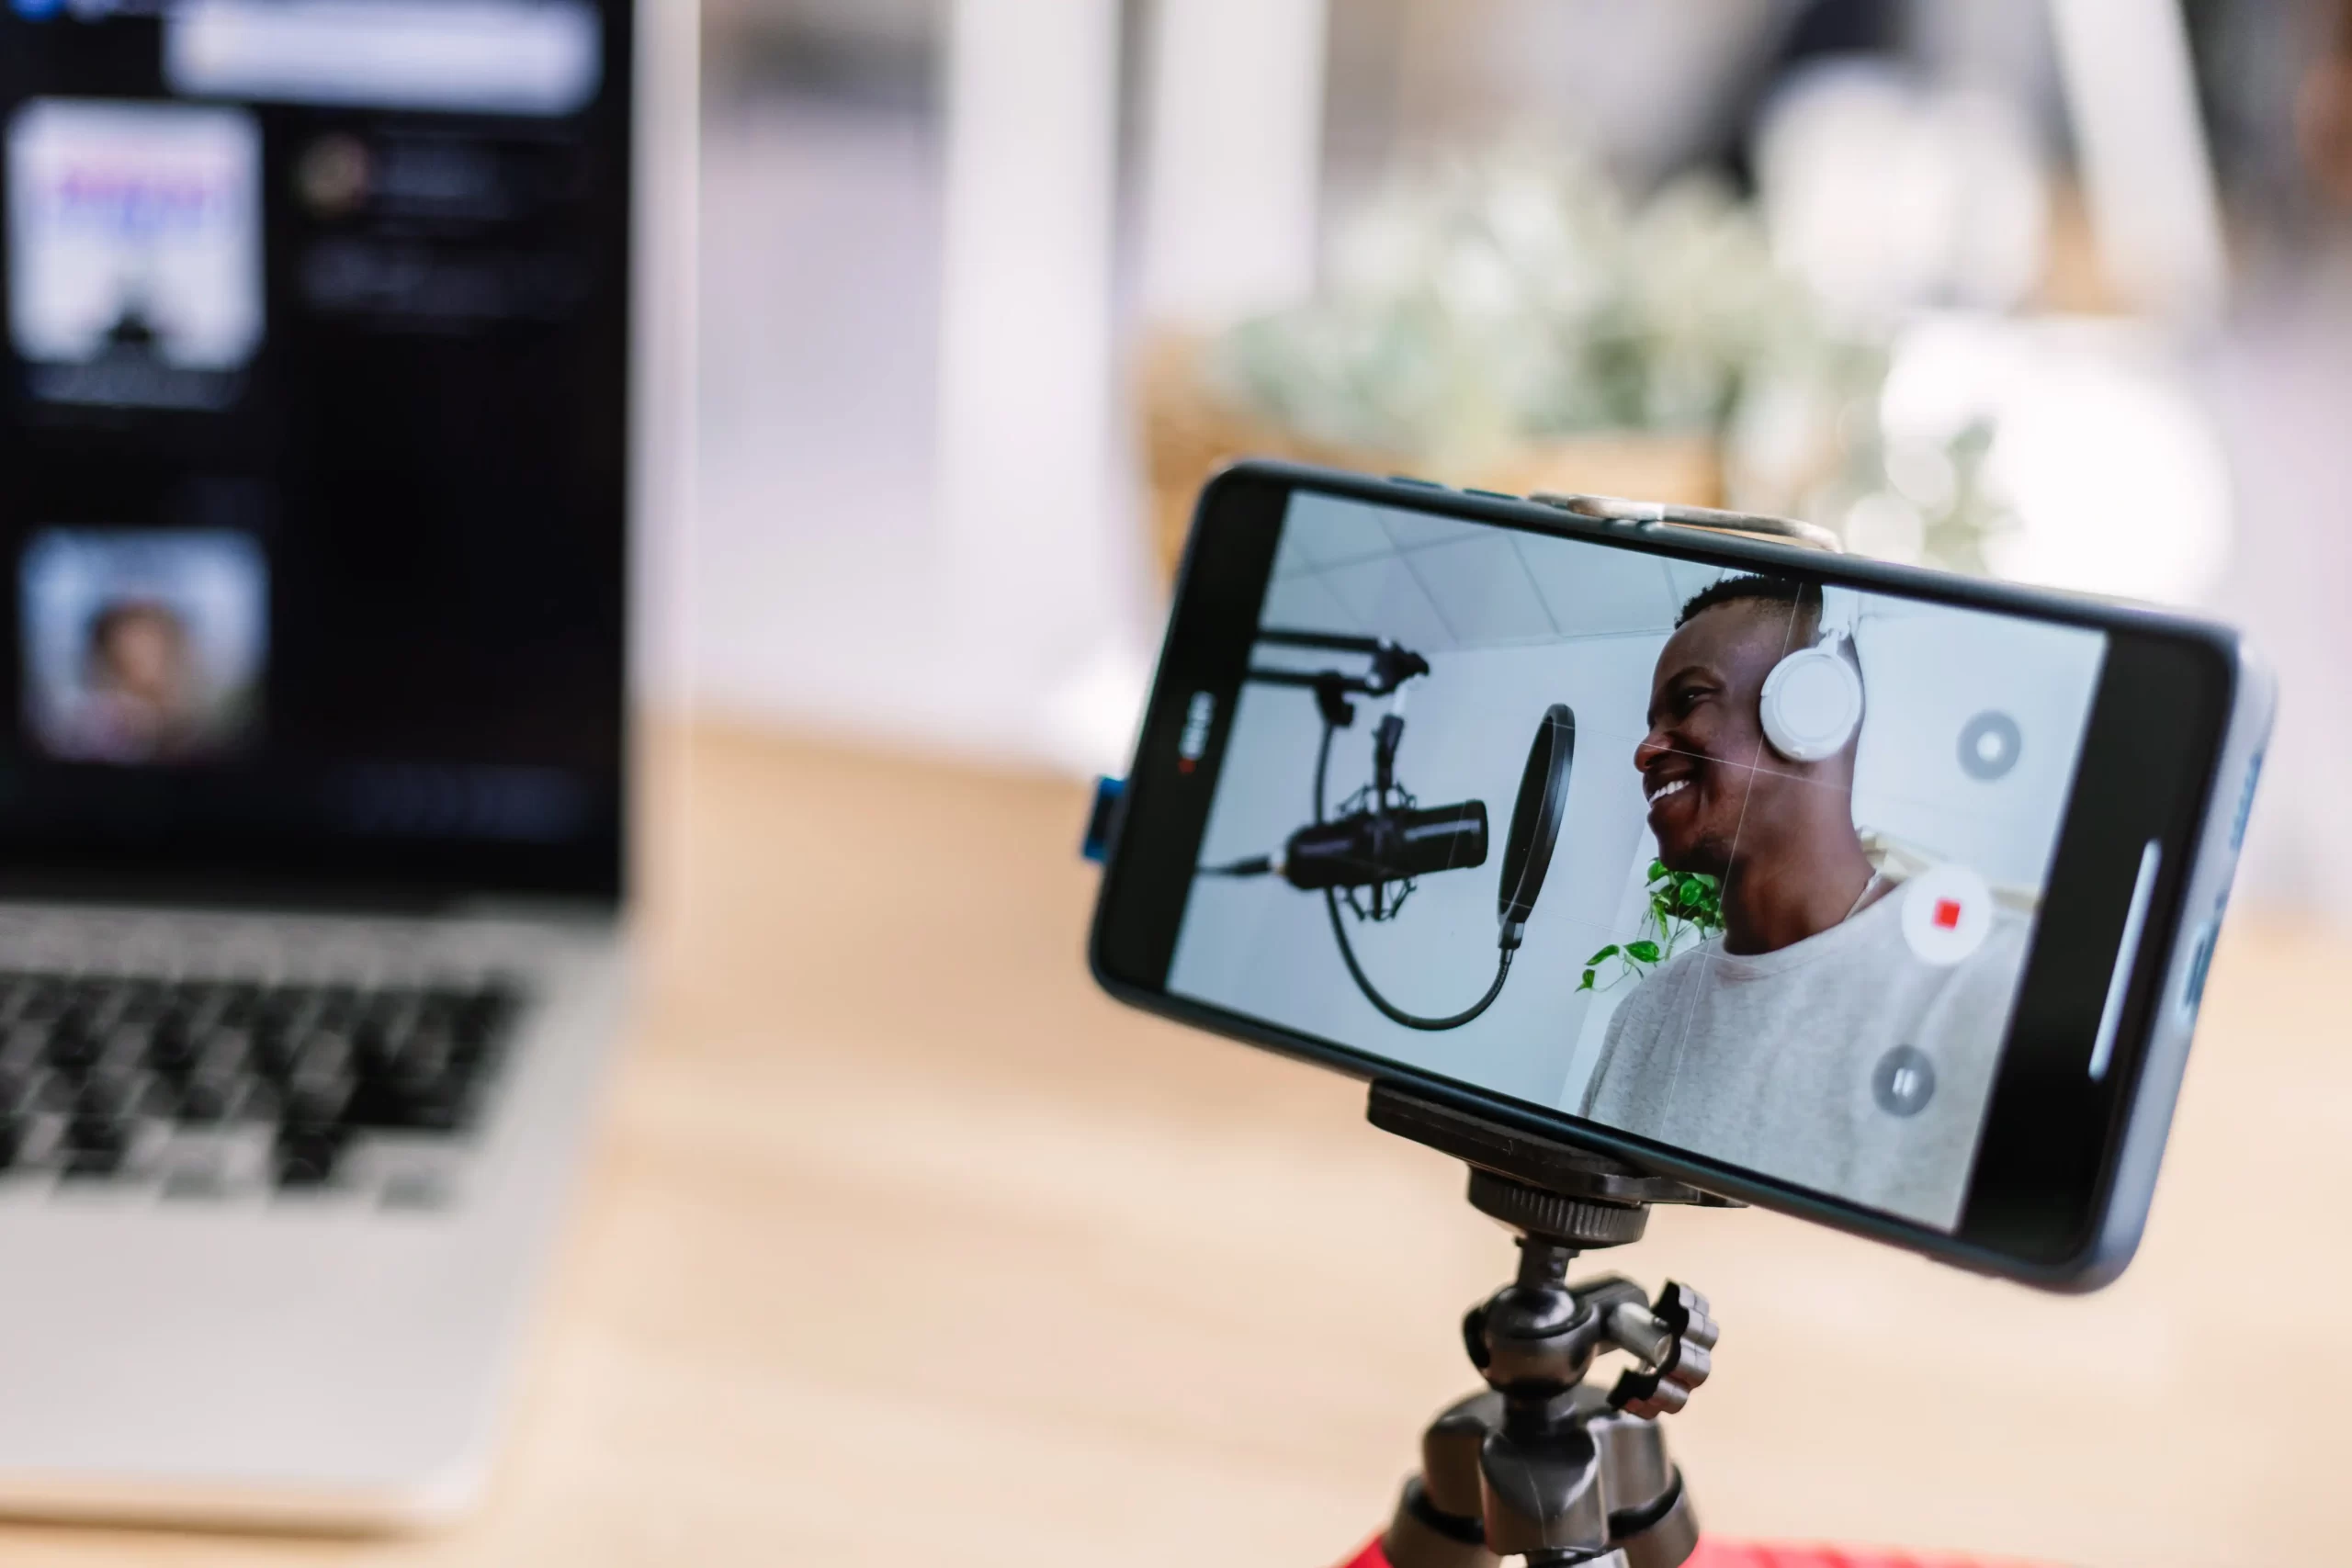 Smiling young man recording podcast with a smartphone mounted on a tripod, while streaming online at home studio.